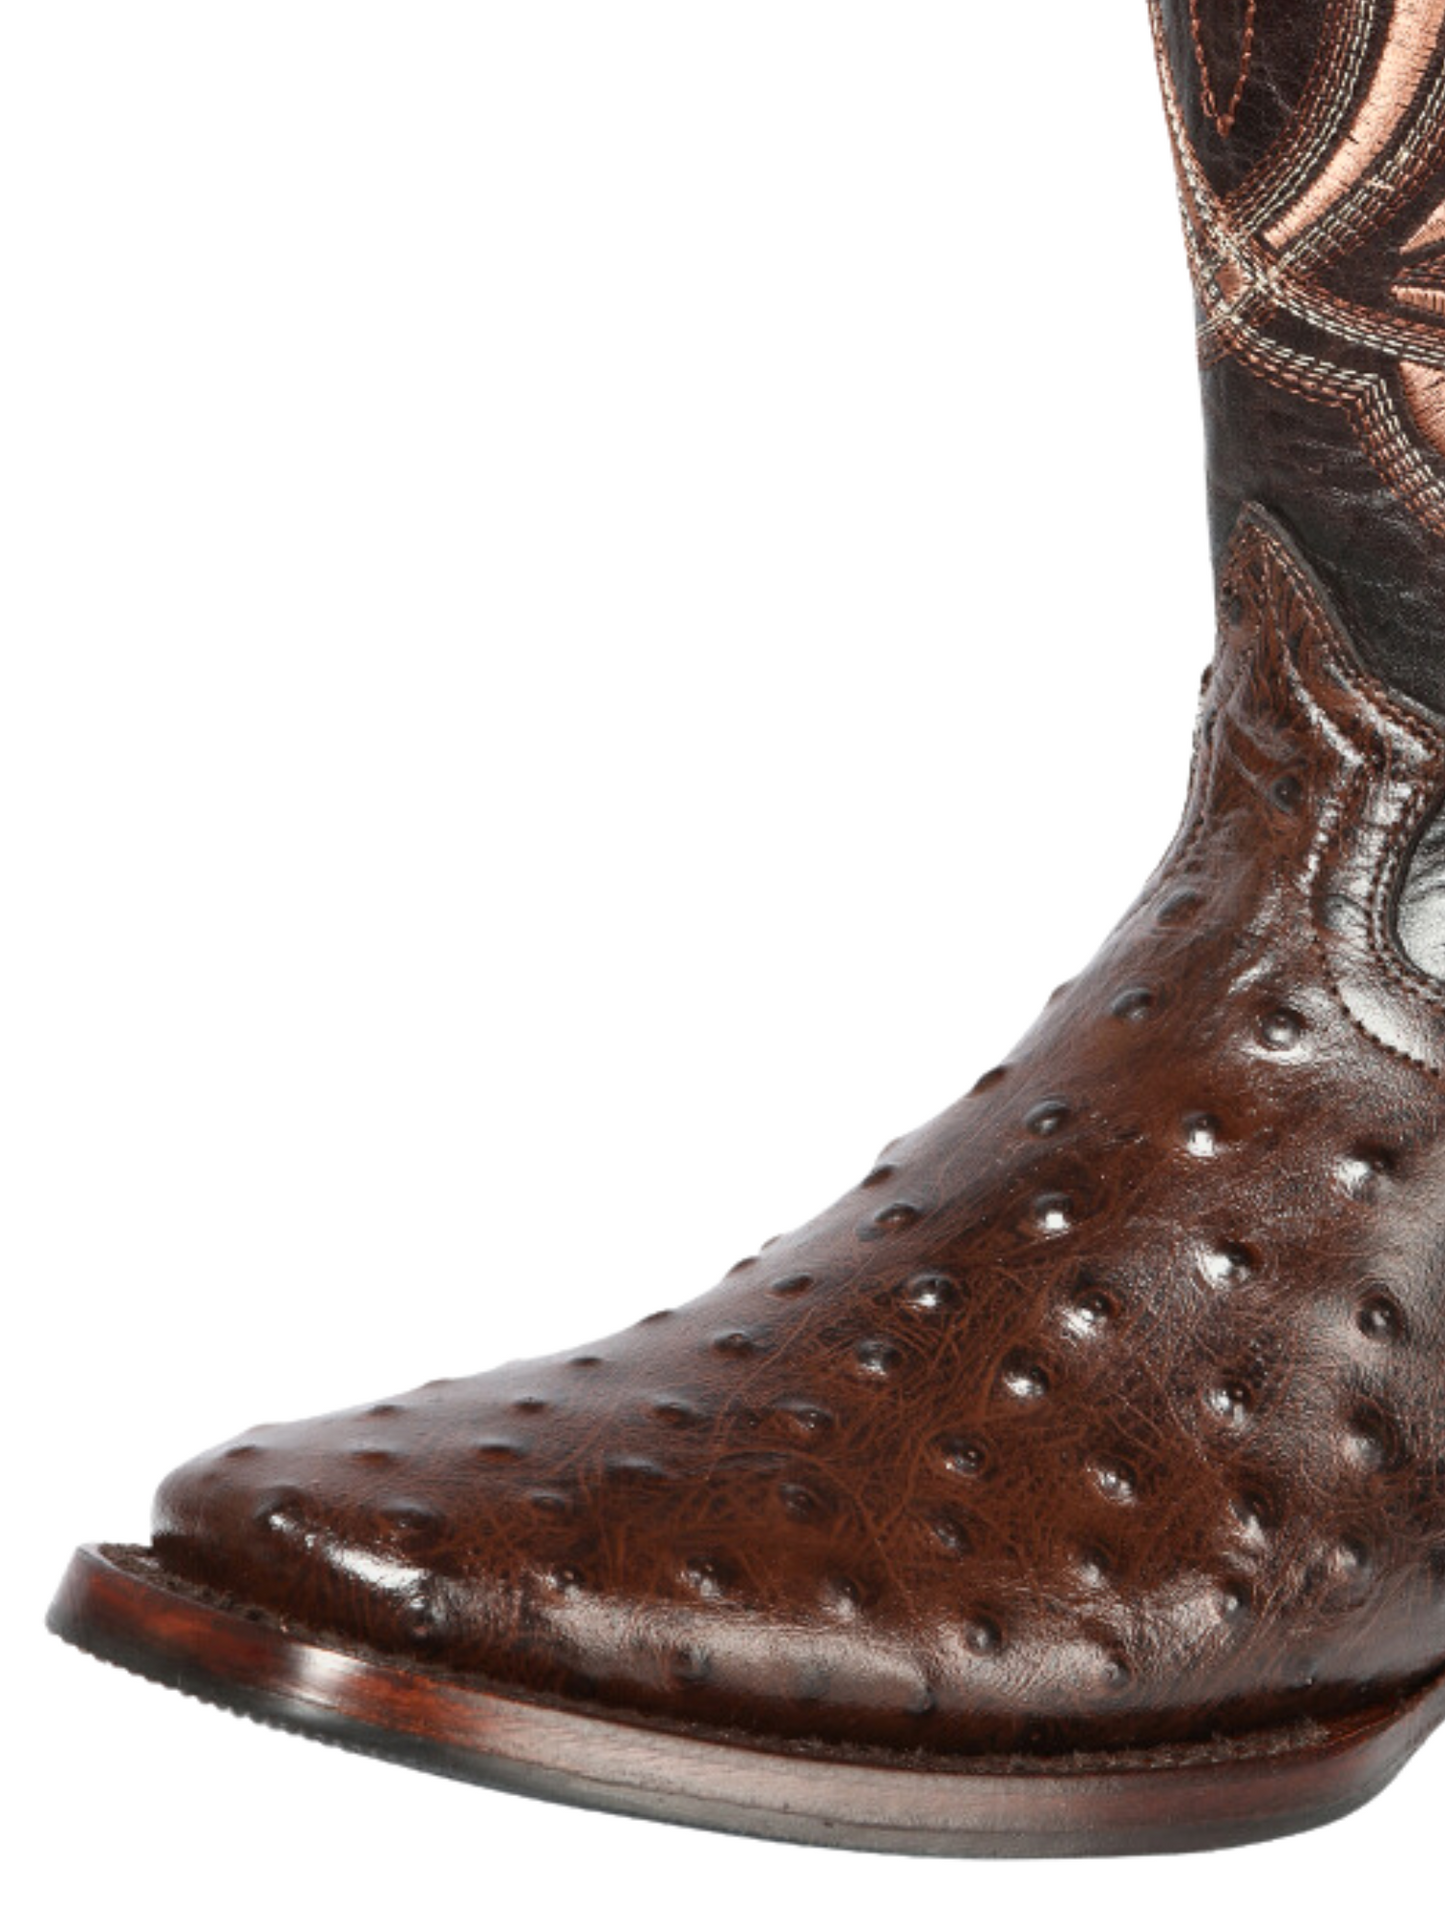 Rodeo Cowboy Boots Imitation Ostrich Engraved in Cowhide Leather for Men 'El General' - ID: 44665 Cowboy Boots El General